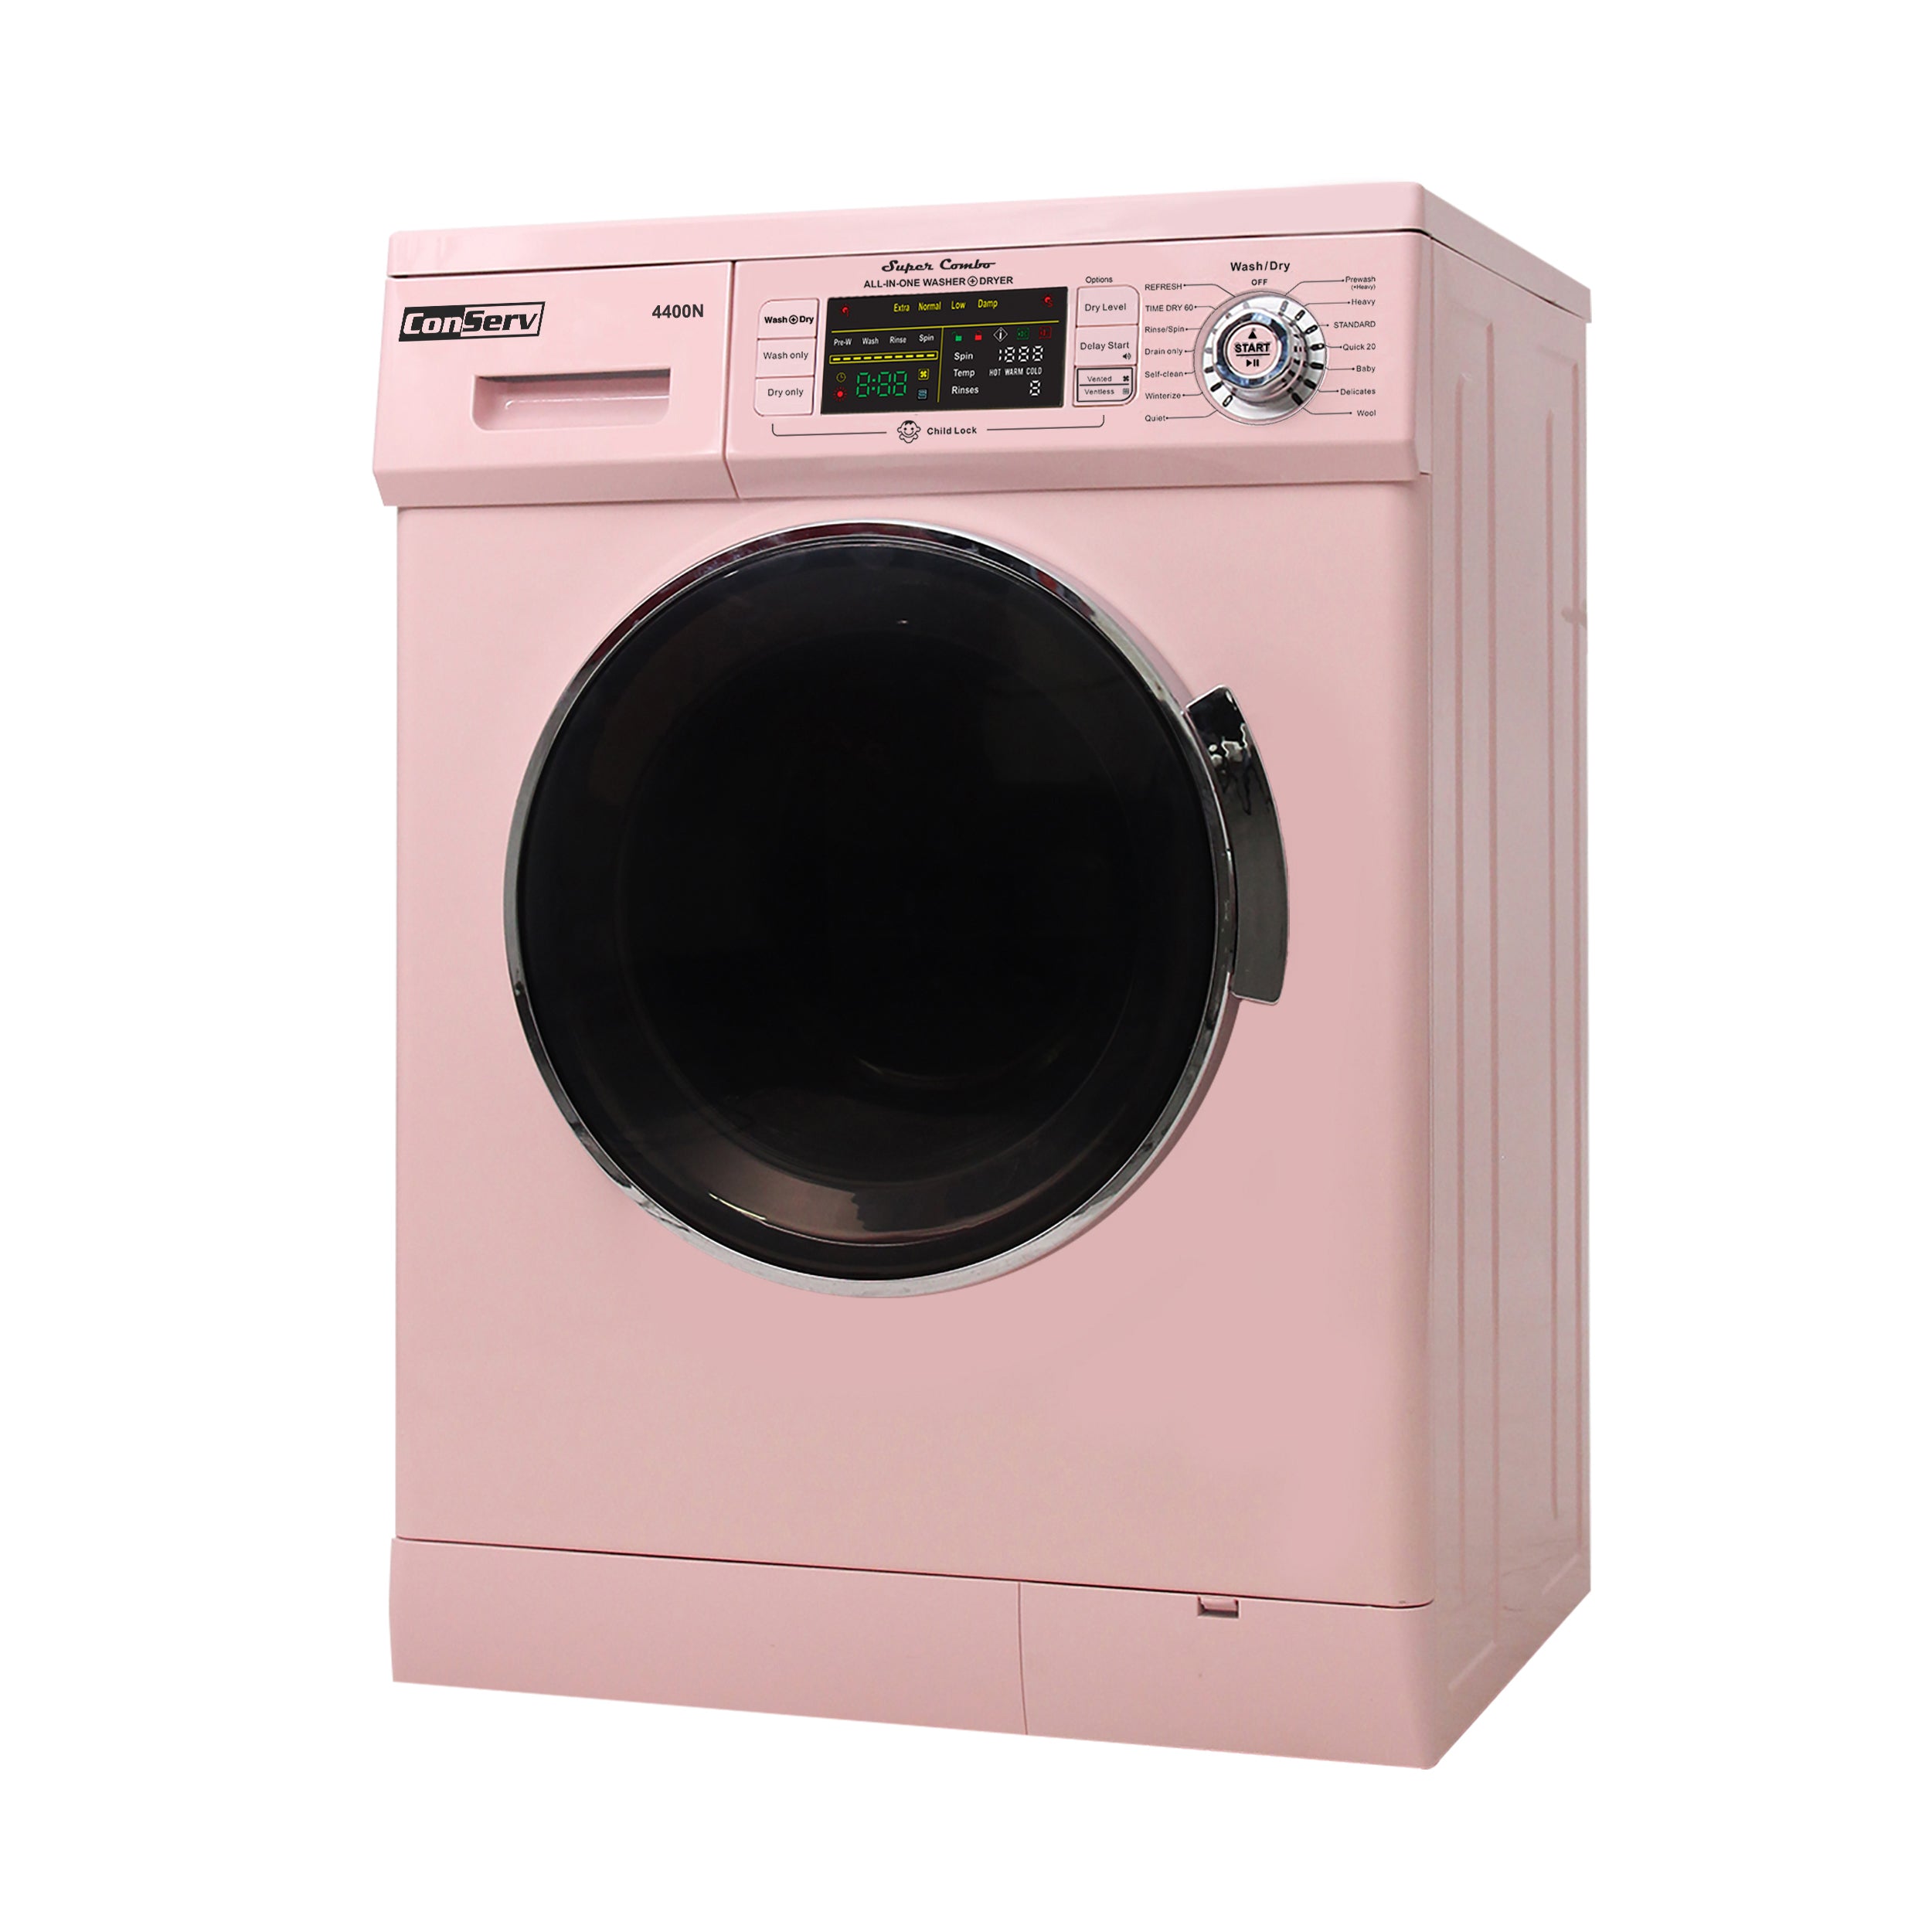 Compact 13 lbs Combination Washer DryerVented/Ventless Dry, Winterize, Quiet, Easy to Use Controls, 2020